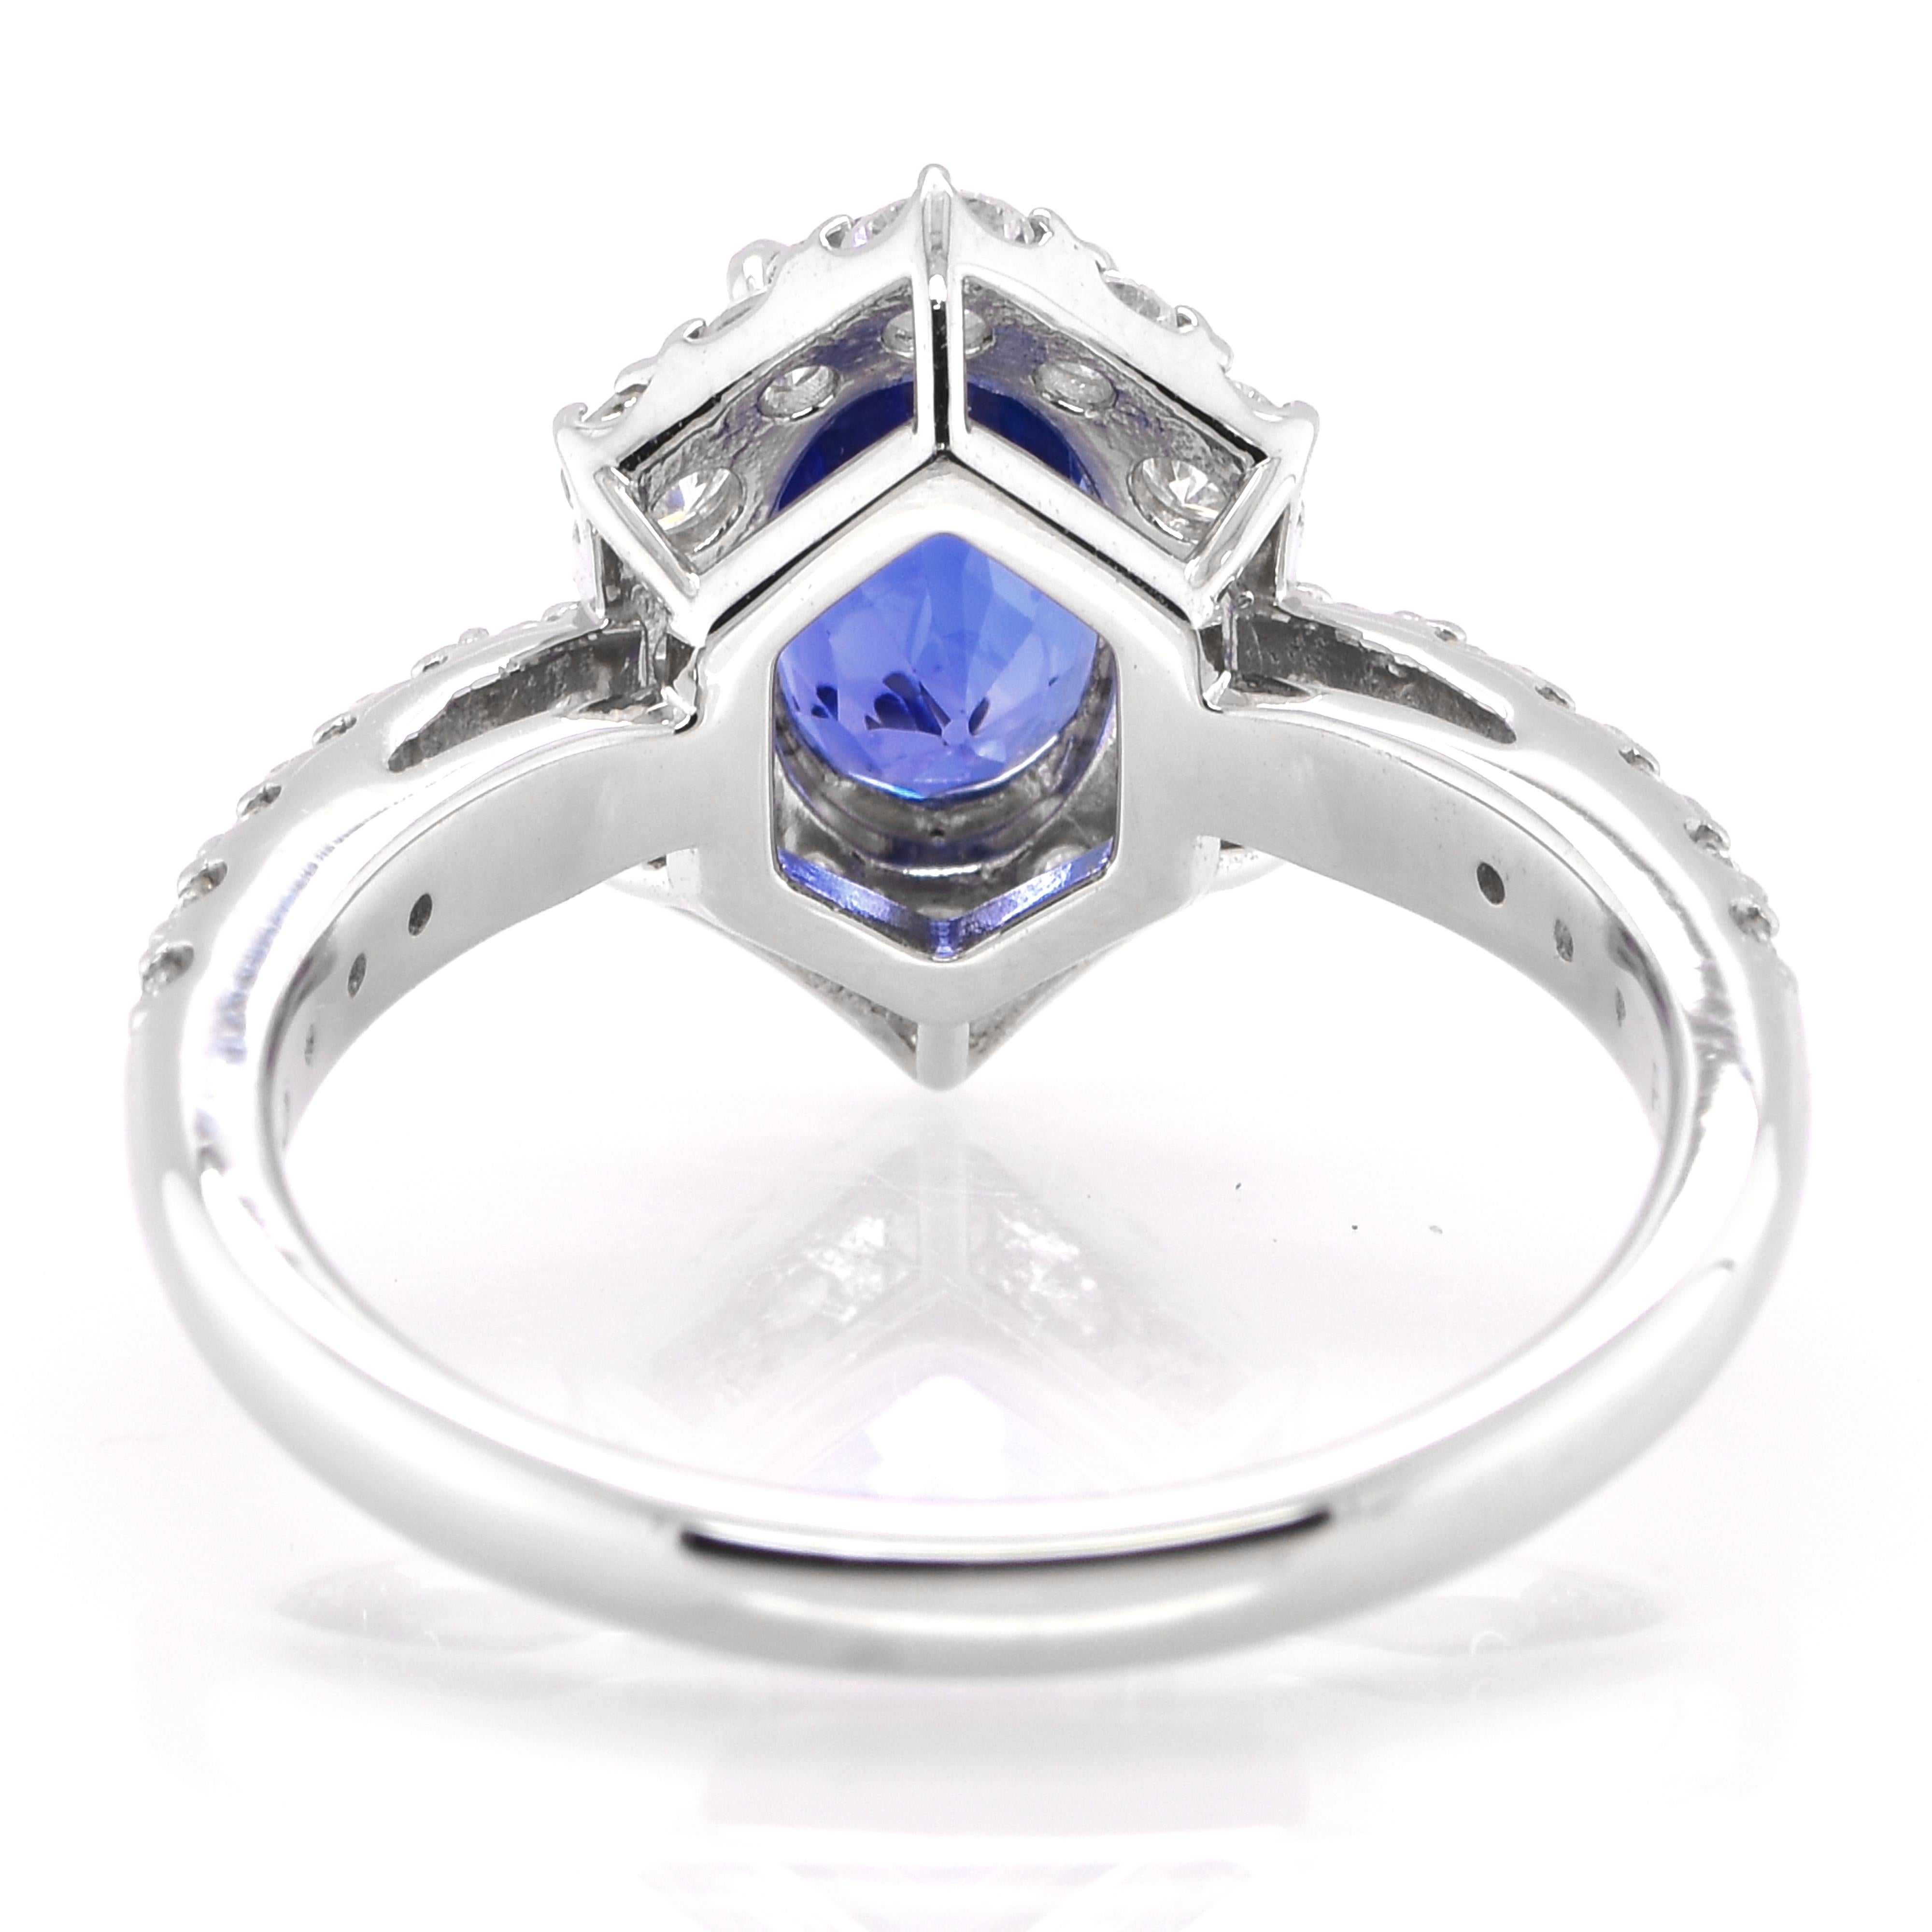 Women's 2.27 Carat Natural Unheated, Ceylon Sapphire and Diamond Ring set in Platinum For Sale